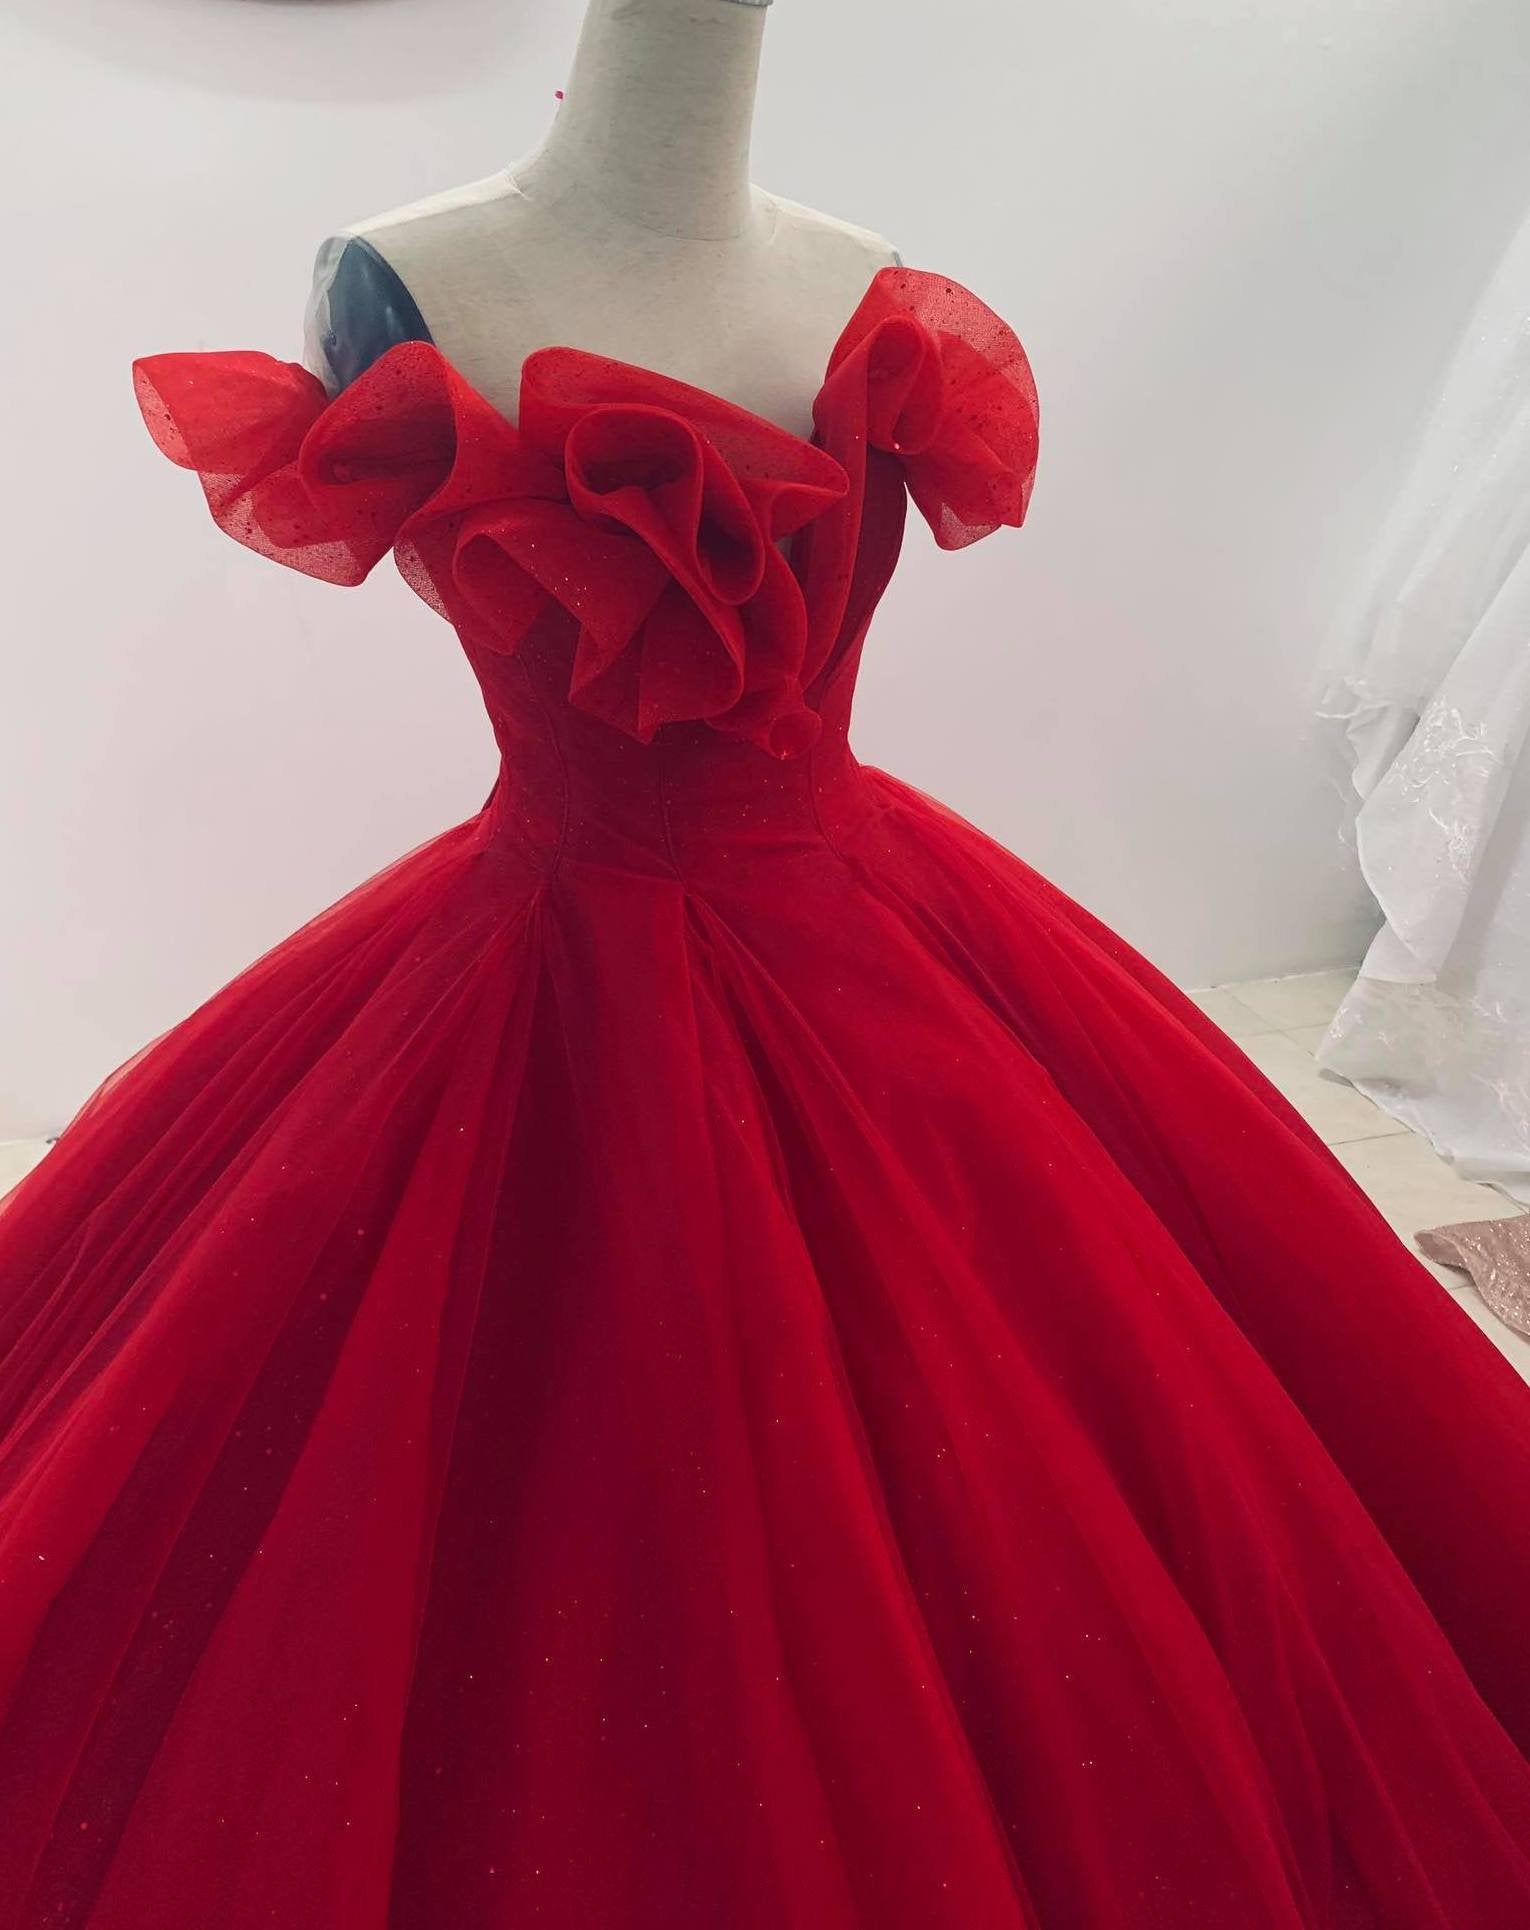 Bright red off the shoulder full tulle wedding ball gown